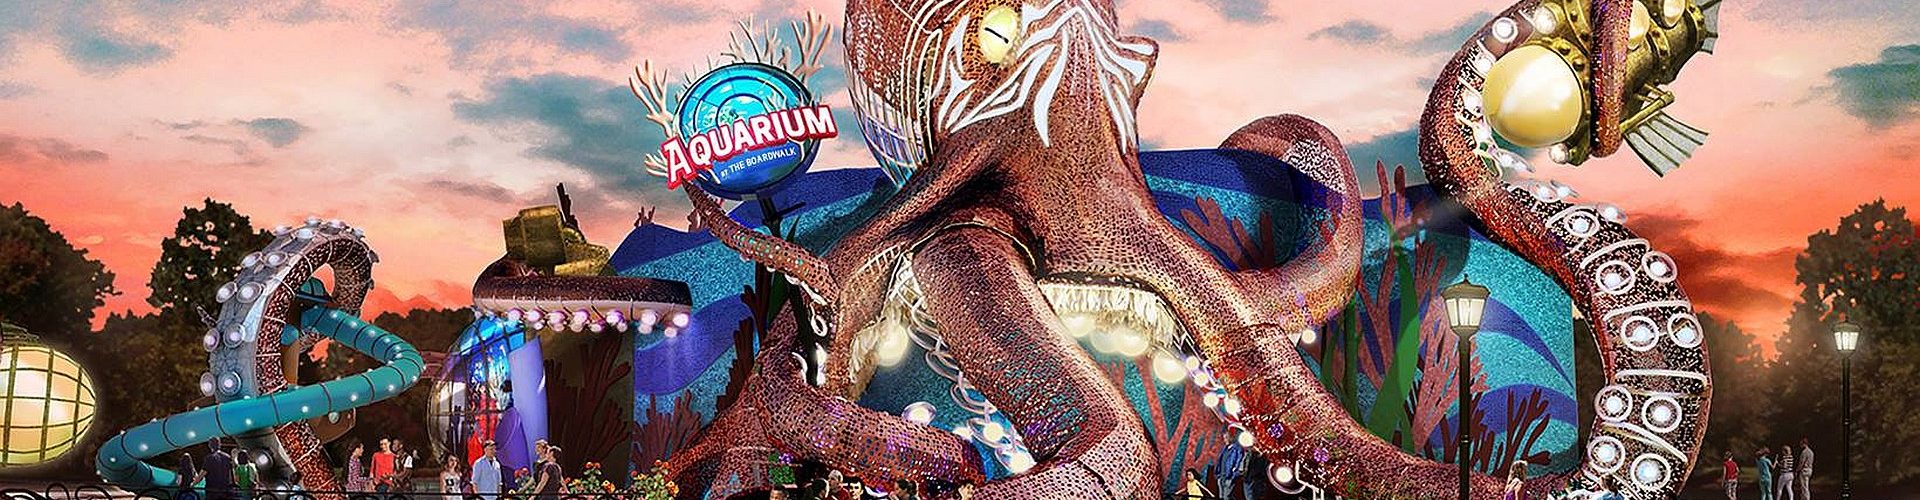 The Aquarium at the Boardwalk is an all-new attraction set to open in Branson, Missouri in 2020